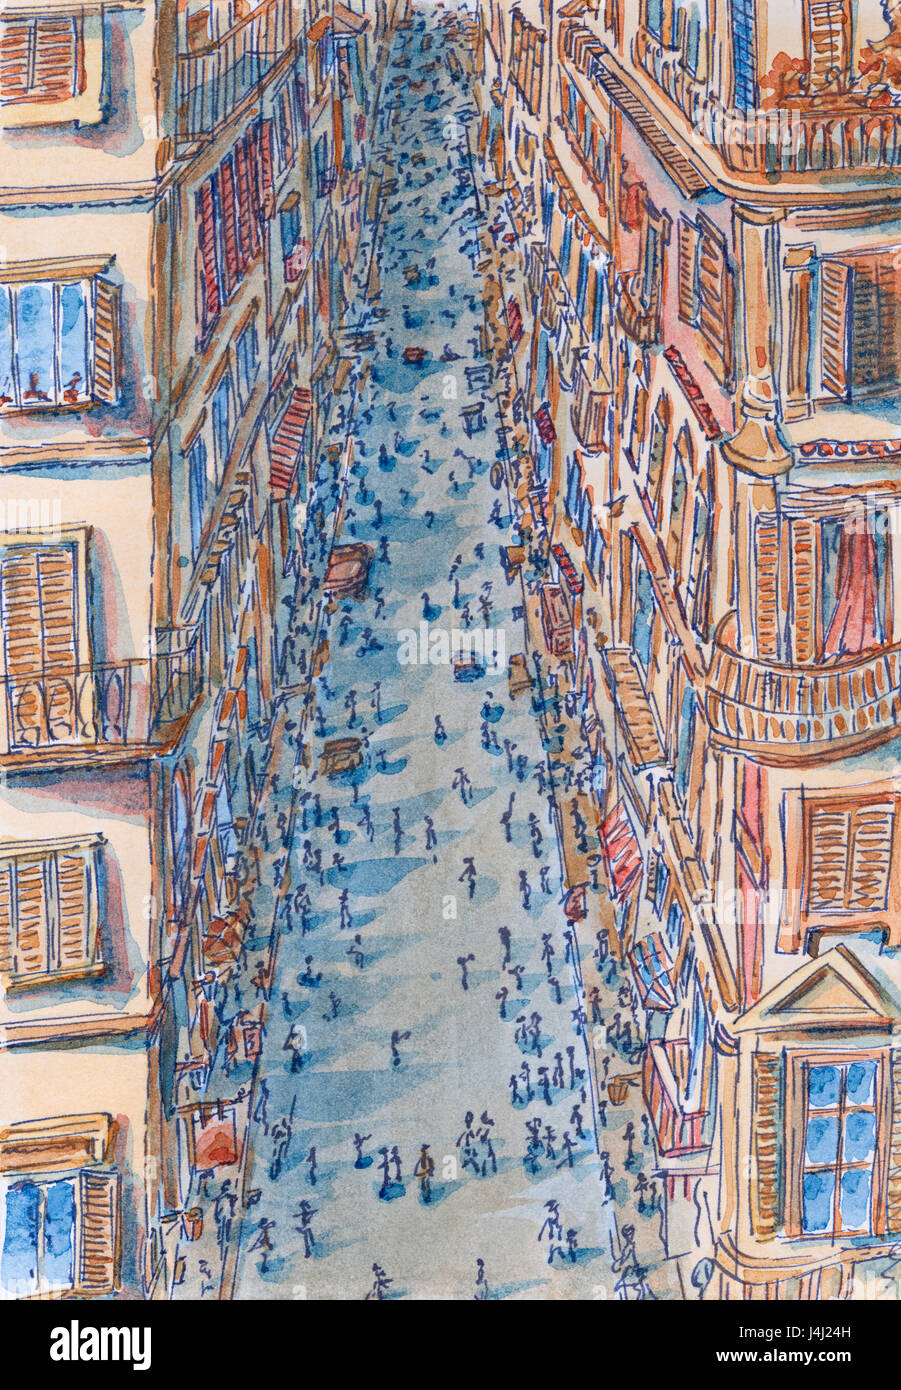 Street of Rome at high angle view. Sketch lines and watercolor on paper. Stock Photo